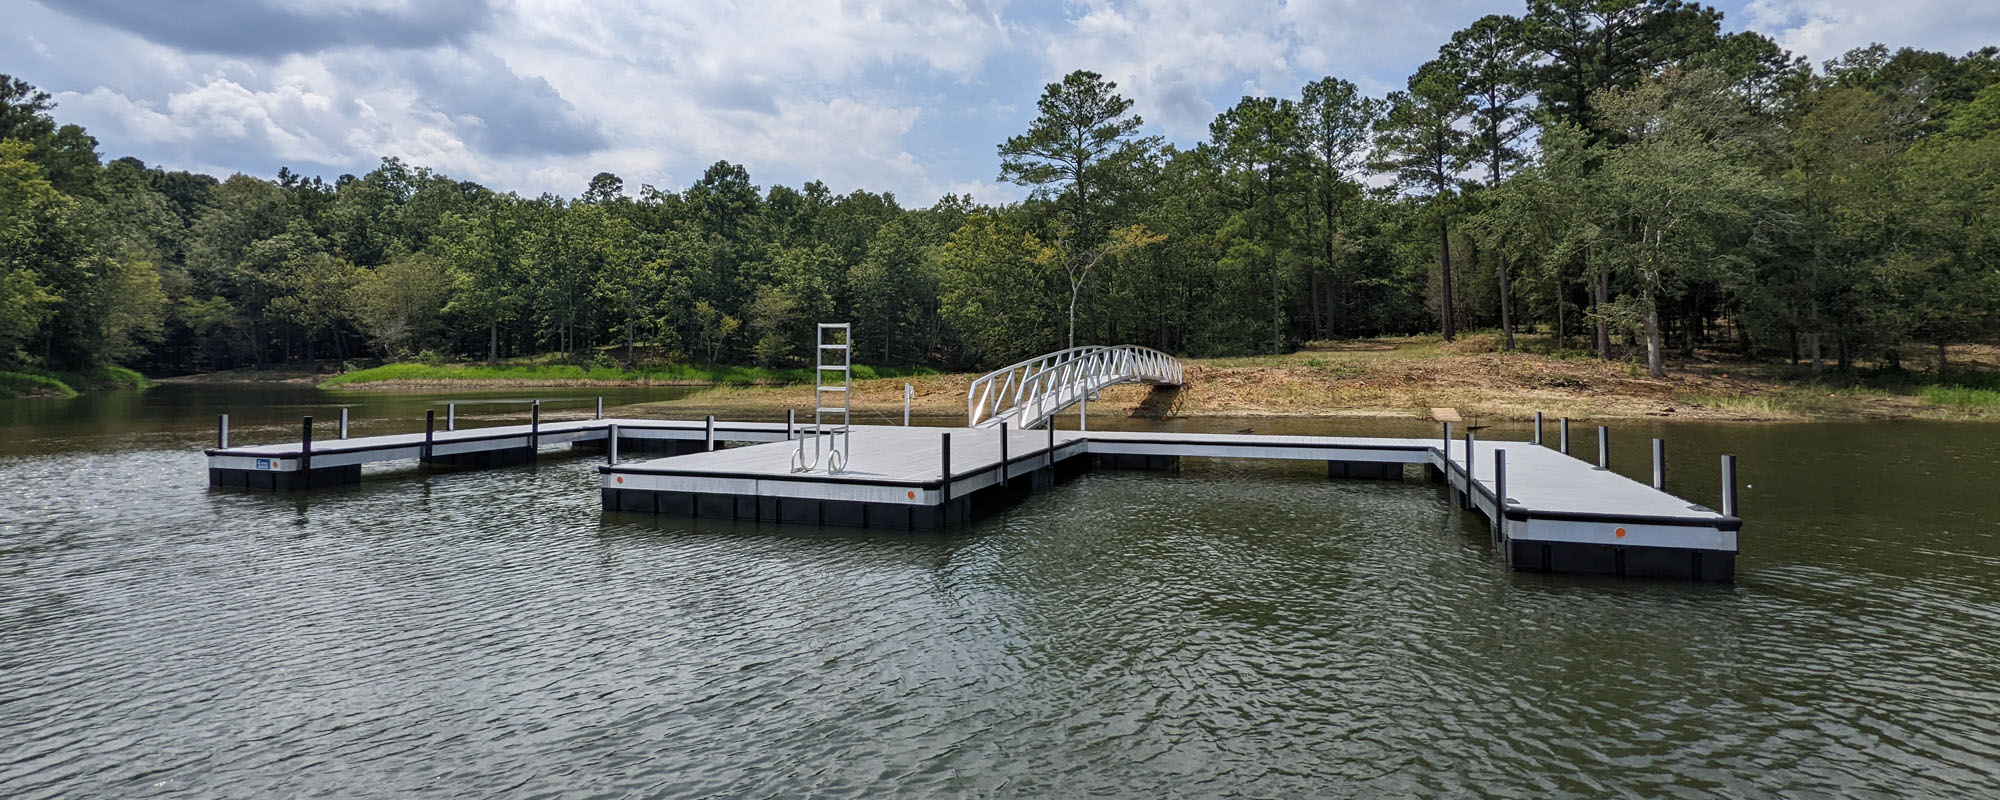 Custom Dock Systems is a full-service marine contractor that offers  custom-built aluminum and steel docks, custom boat lifts, commercial  marinas and multi-slip docks, dock repair and restoration, dock relcation, dock  accessories and